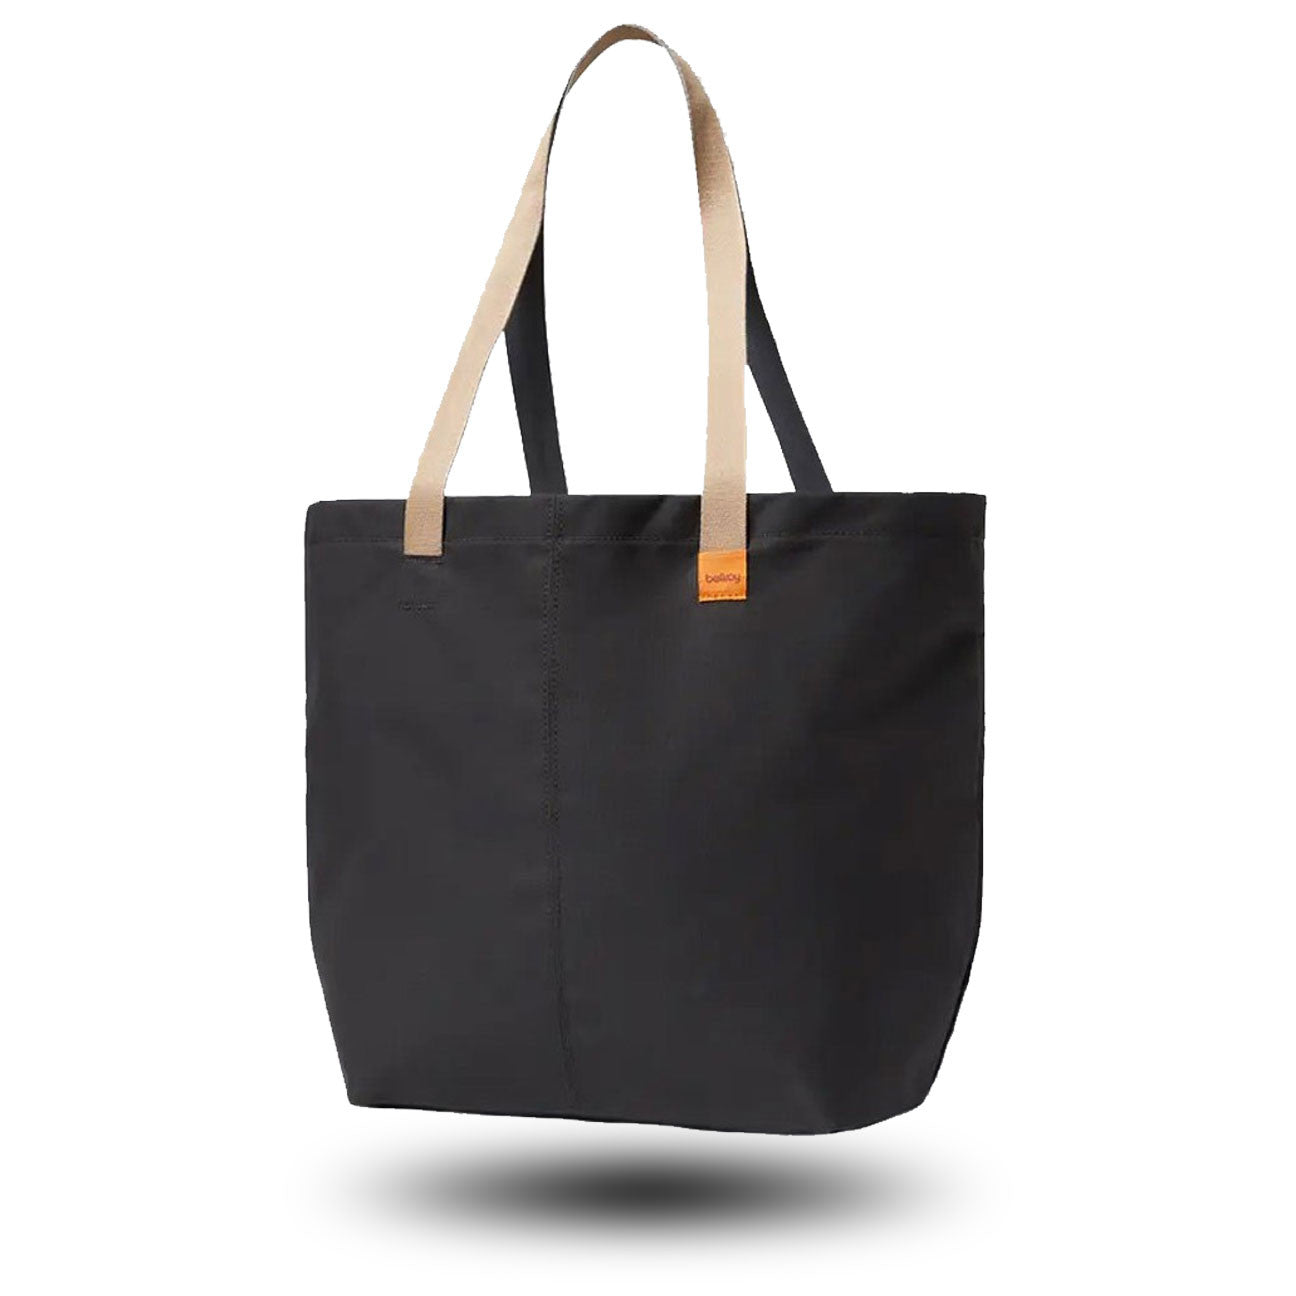 Marked Tote Black